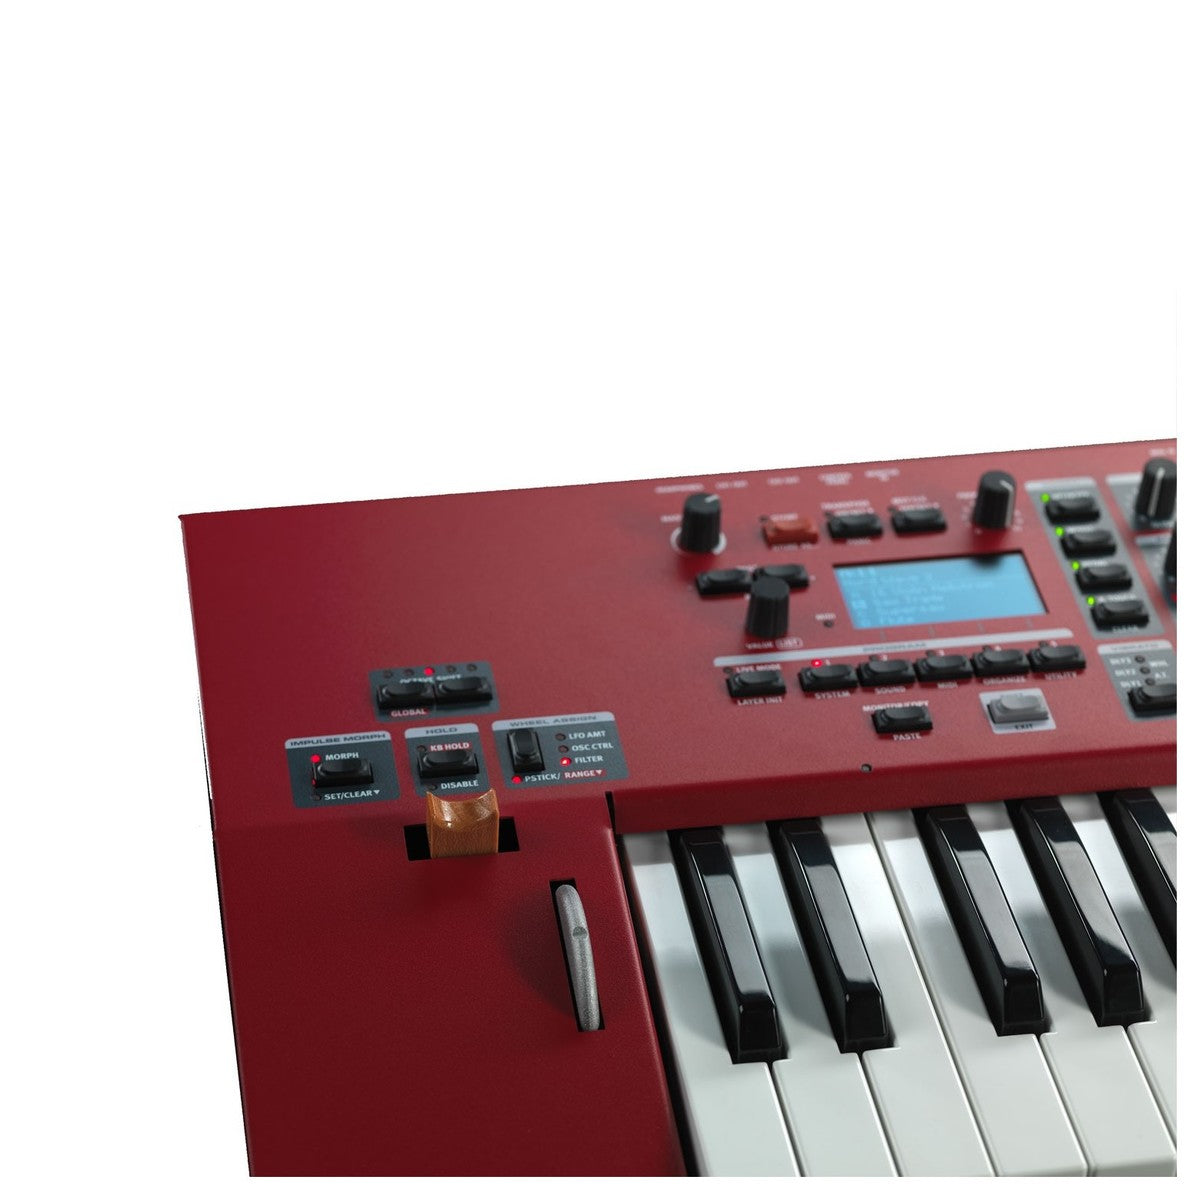 Nord Wave 2 61-Key Keyboard Synthesiser (NEW)